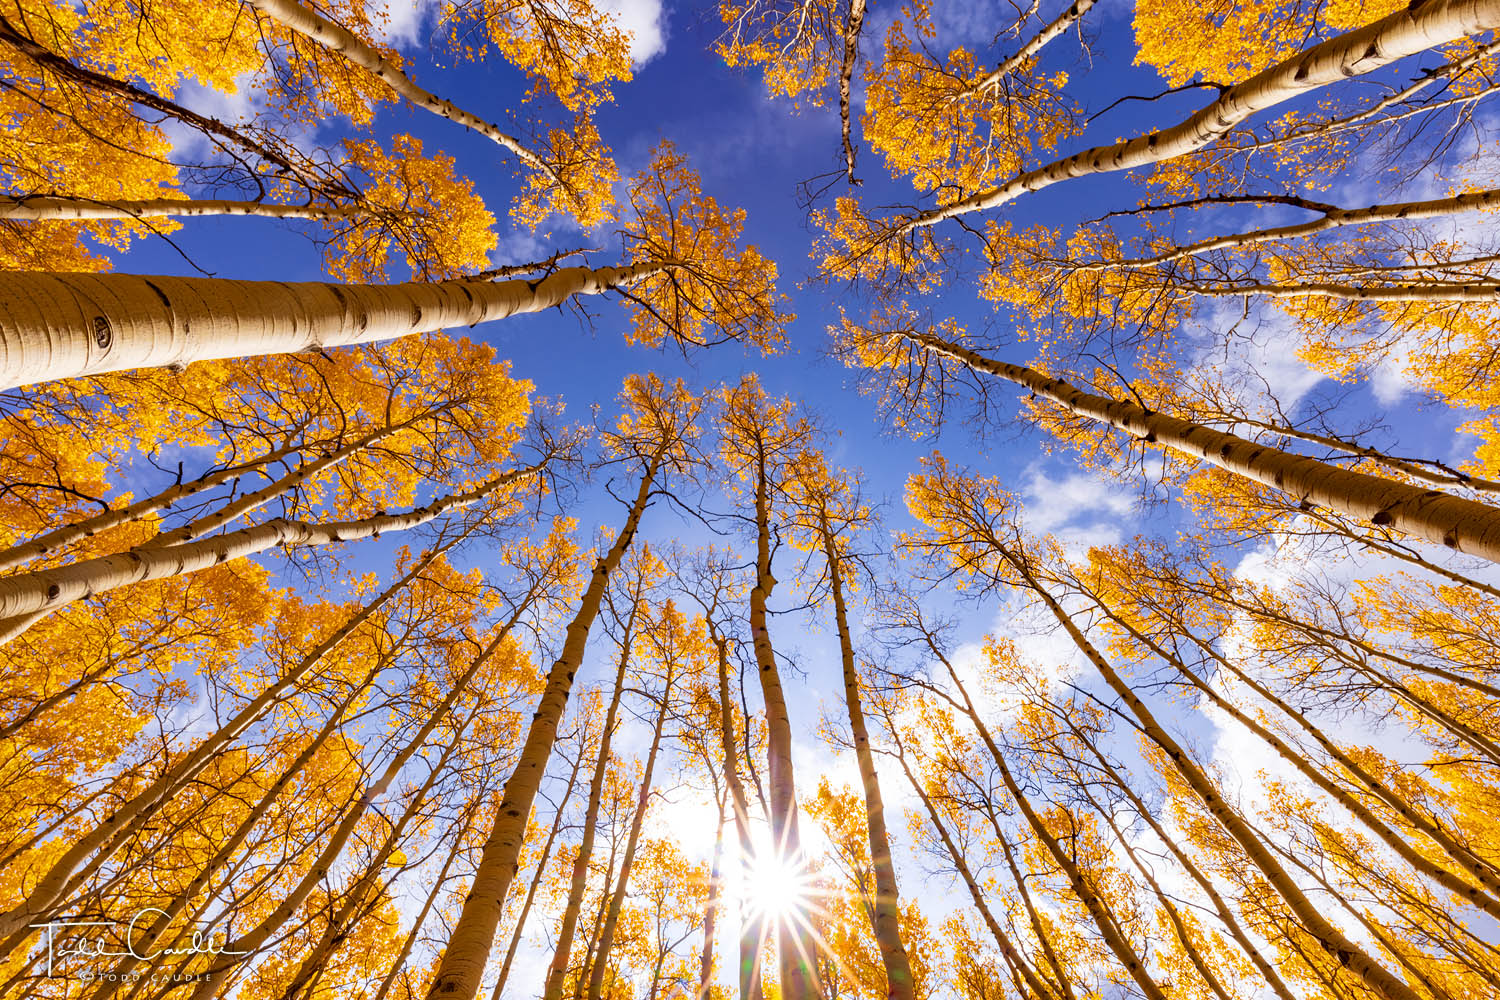 Extensive aspen forests on the east slopes of the Sawatch Range fill the sky.